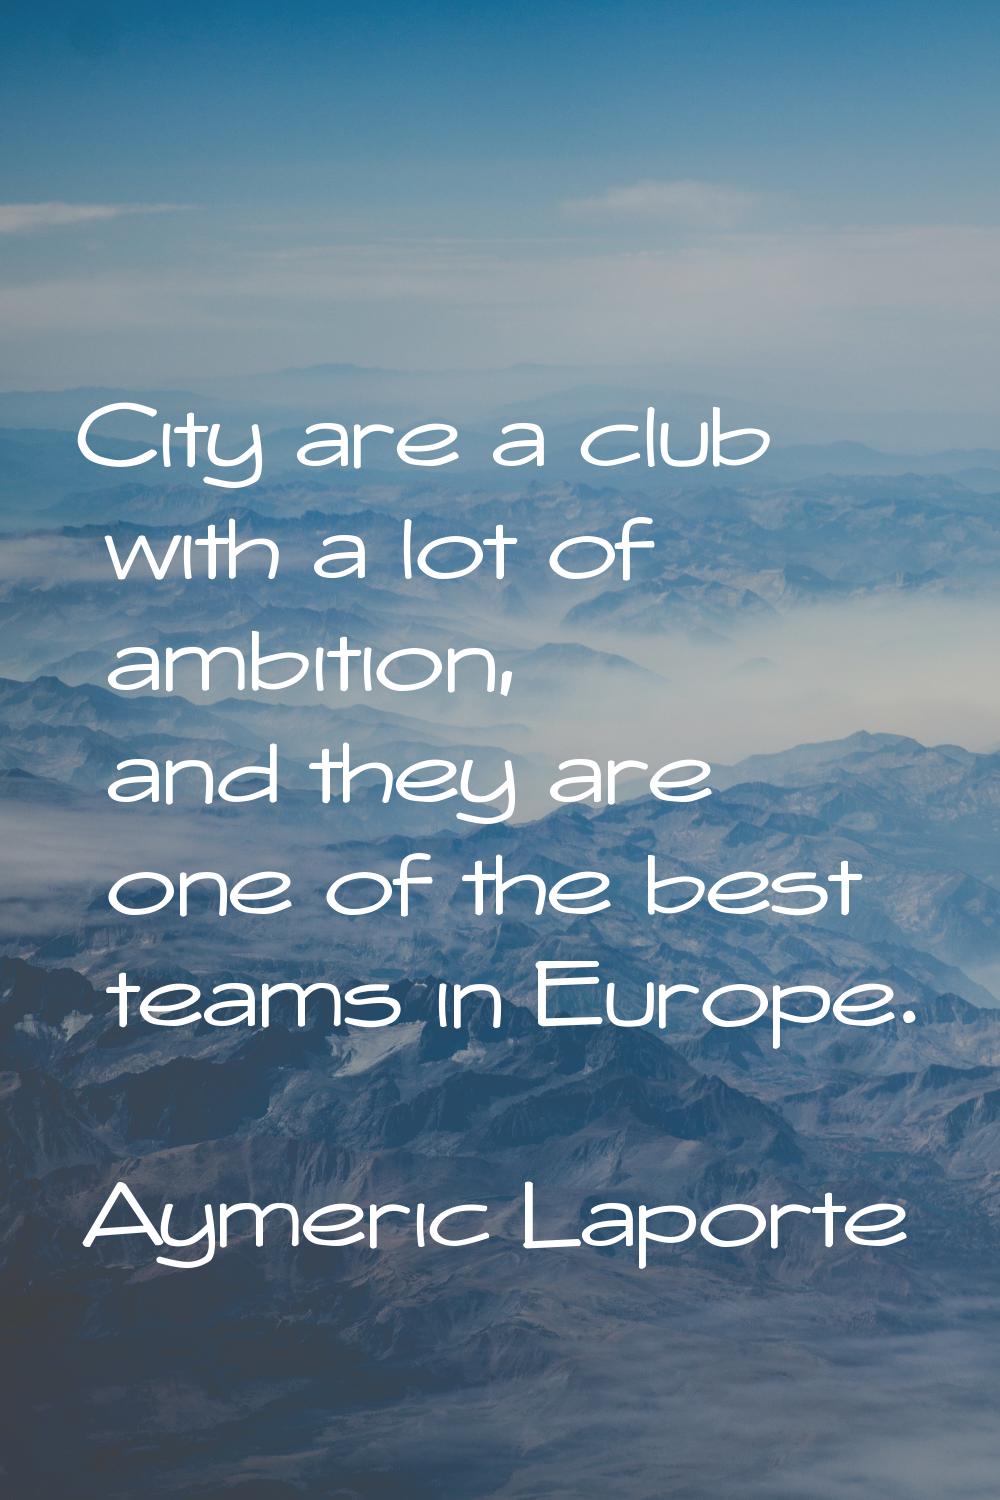 City are a club with a lot of ambition, and they are one of the best teams in Europe.